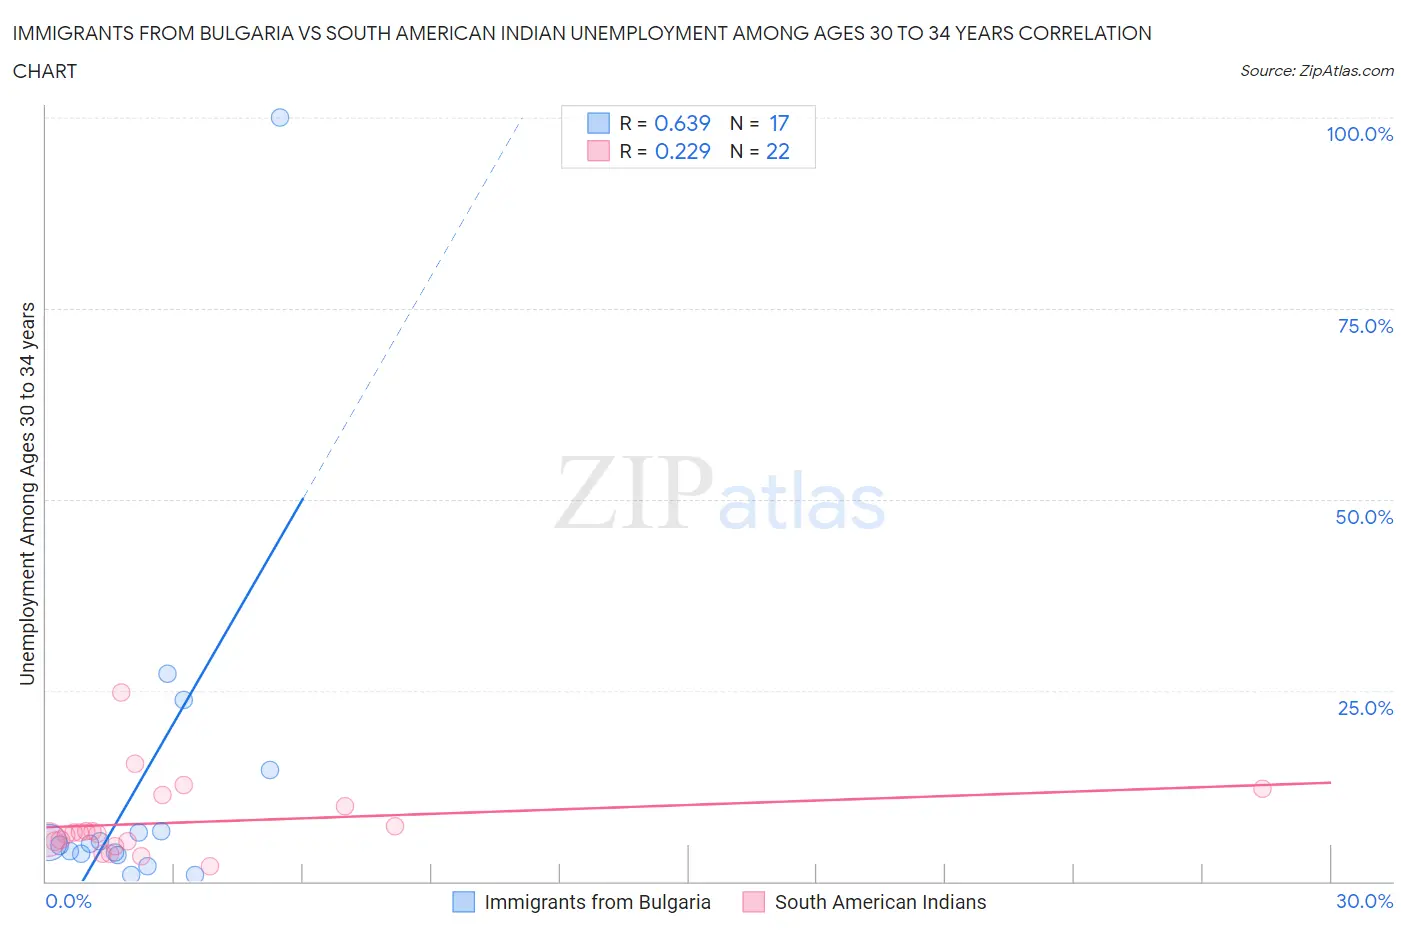 Immigrants from Bulgaria vs South American Indian Unemployment Among Ages 30 to 34 years